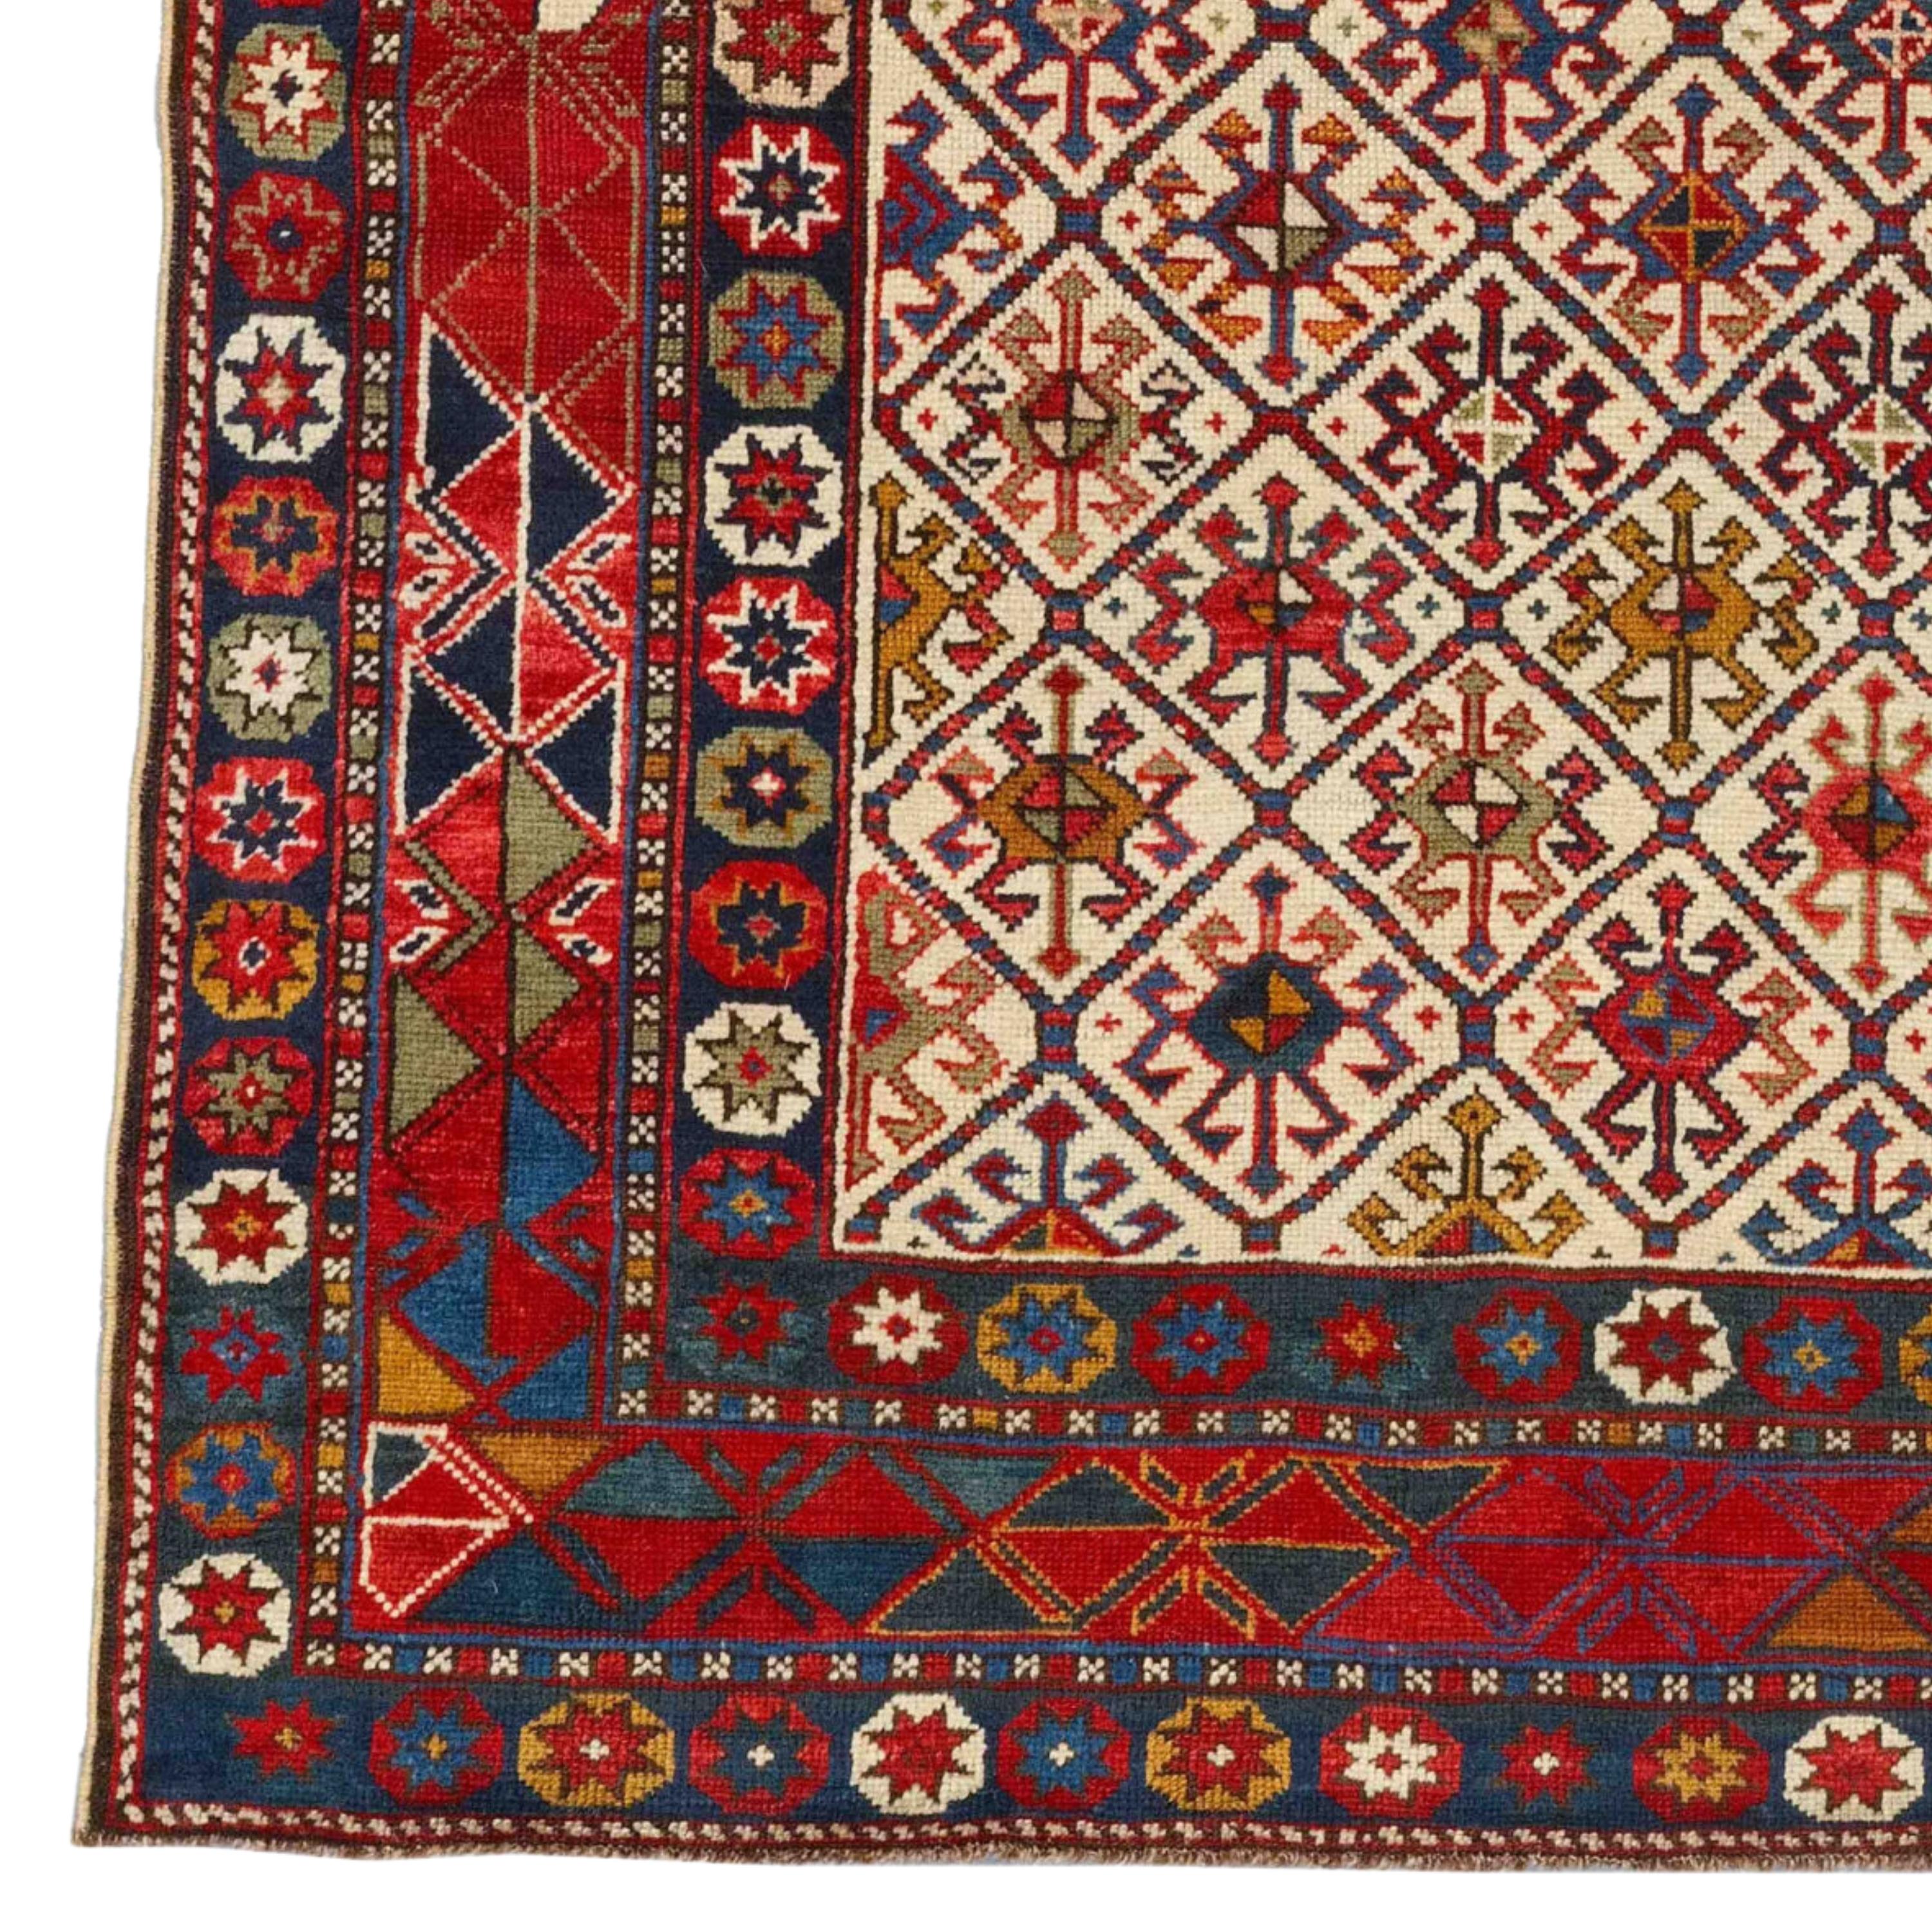 Prayer Kuba Rug | Caucasus Rug
Middle of 19th Century Caucasian Prayer Kuba Rug

Kuba carpet, floor covering from the Caucasus woven around Kuba (now Kuba) in northern Azerbaijan. Several important types of Kuba carpets from the past century and a